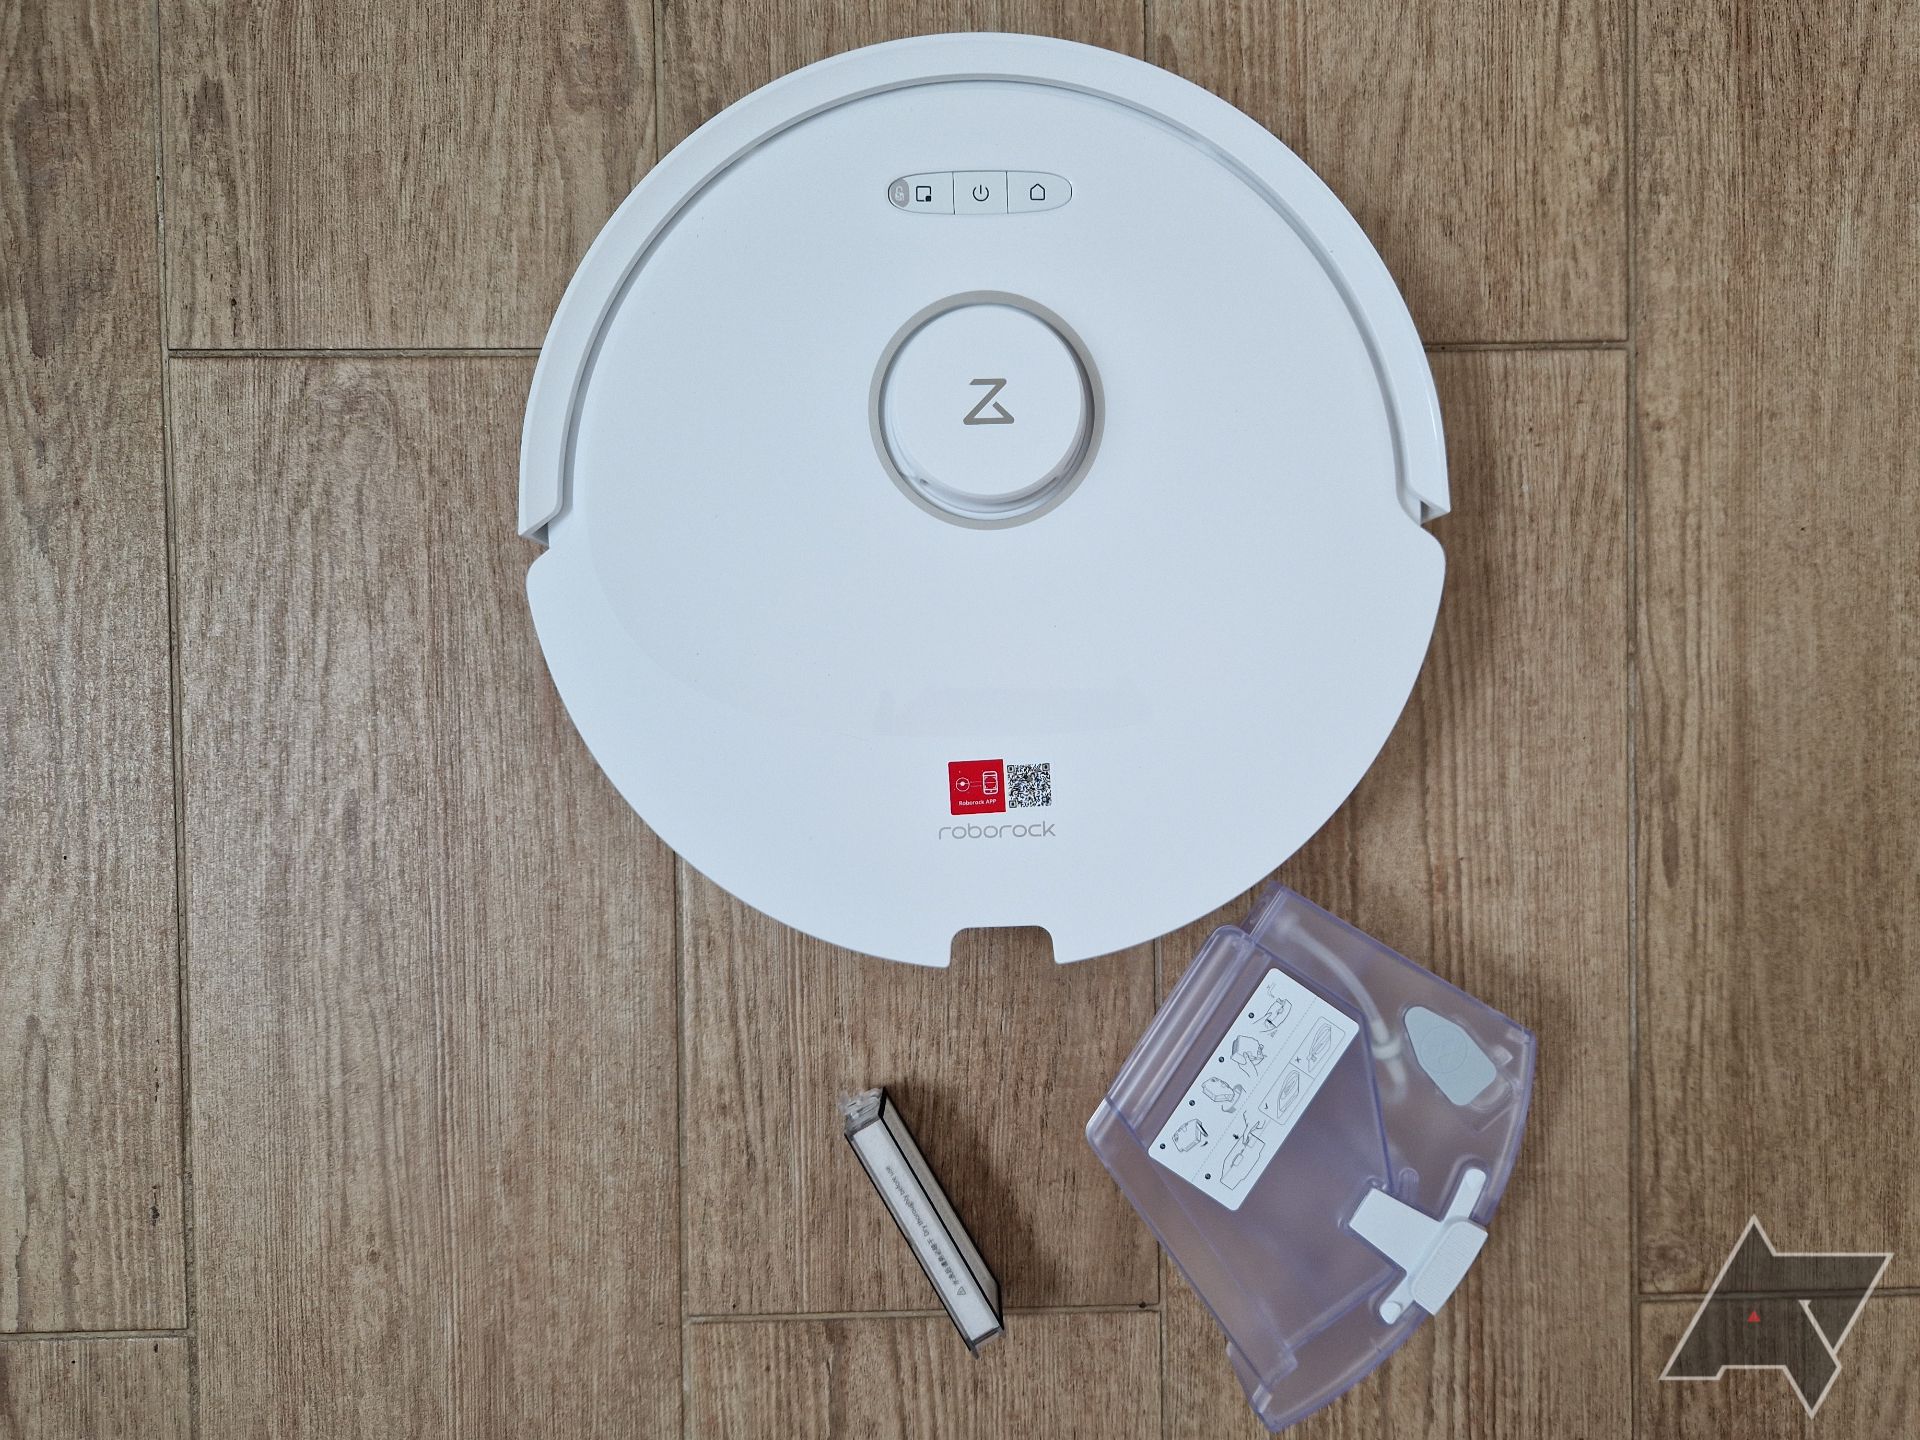 Roborock Q8 Max Robot Vacuum and Mop with Obstacle Avoidance, LiDAR  Navigation, 5500Pa Suction Power, and App Control(White) 